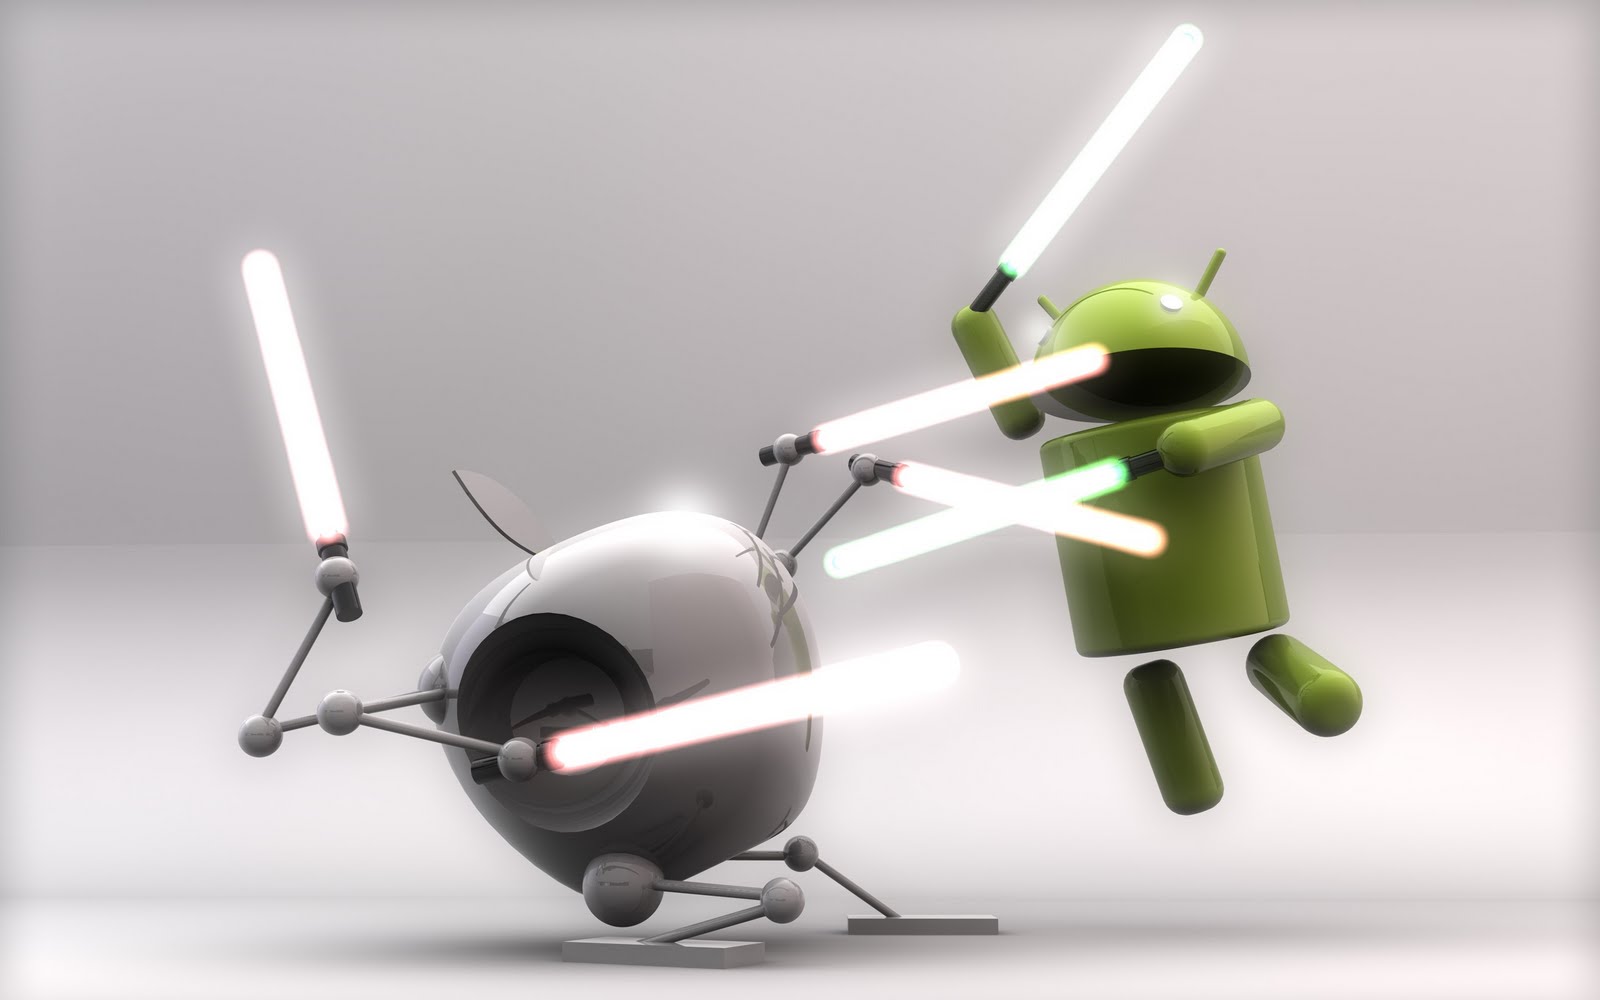 iOs vs Android: Battle of the Platforms